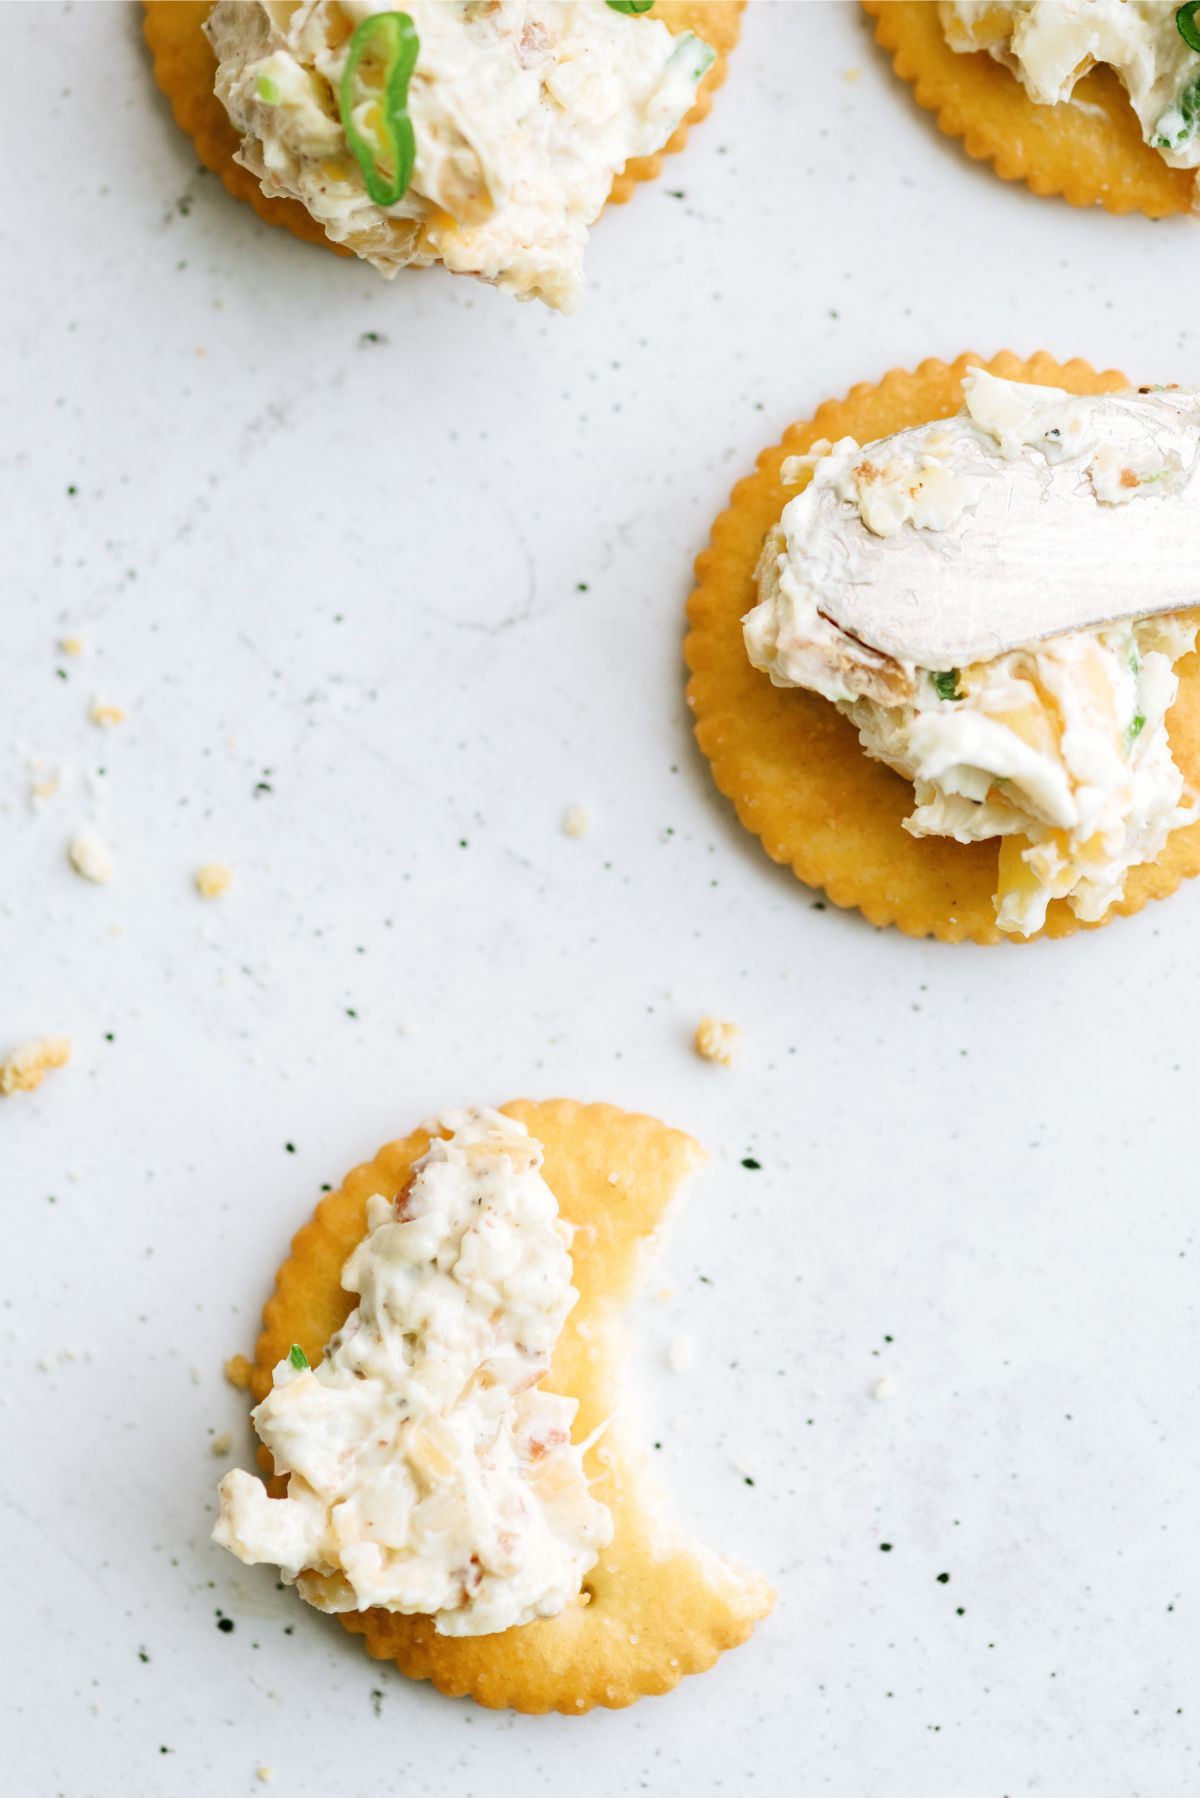 Ritz crackers topped with Million Dollar Dip, once cracker with a bite taken out of it